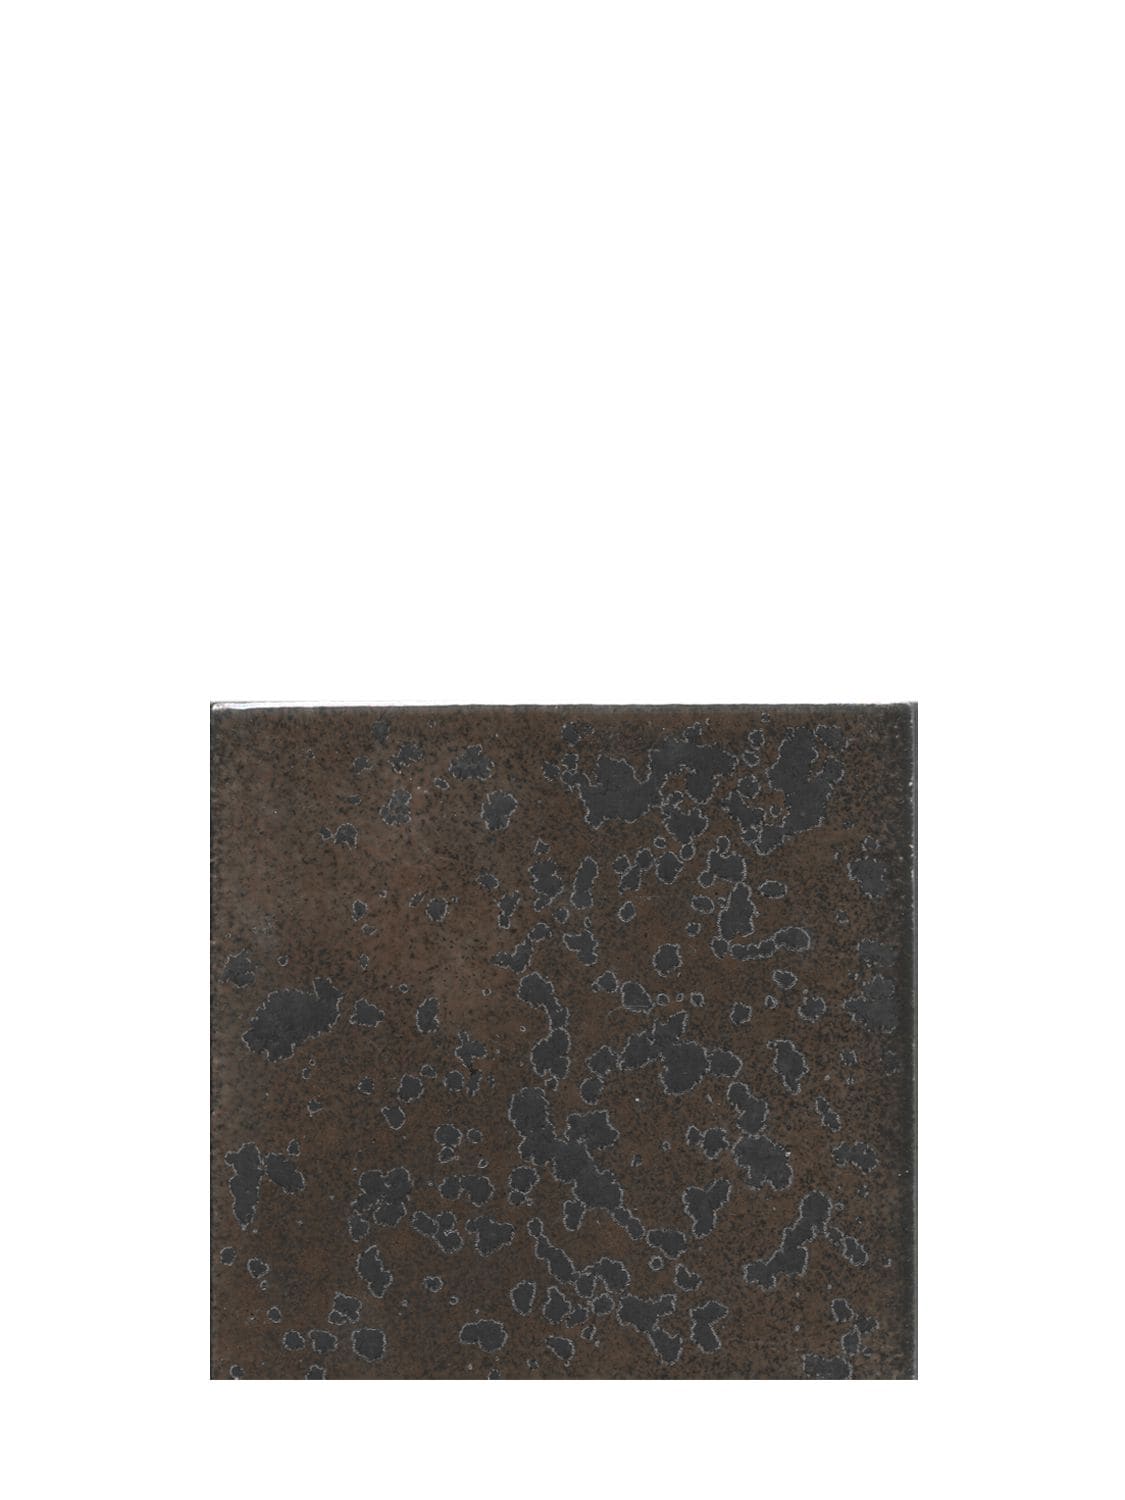 Slowtile Outdoors Set Of 100 Tiles In Brown